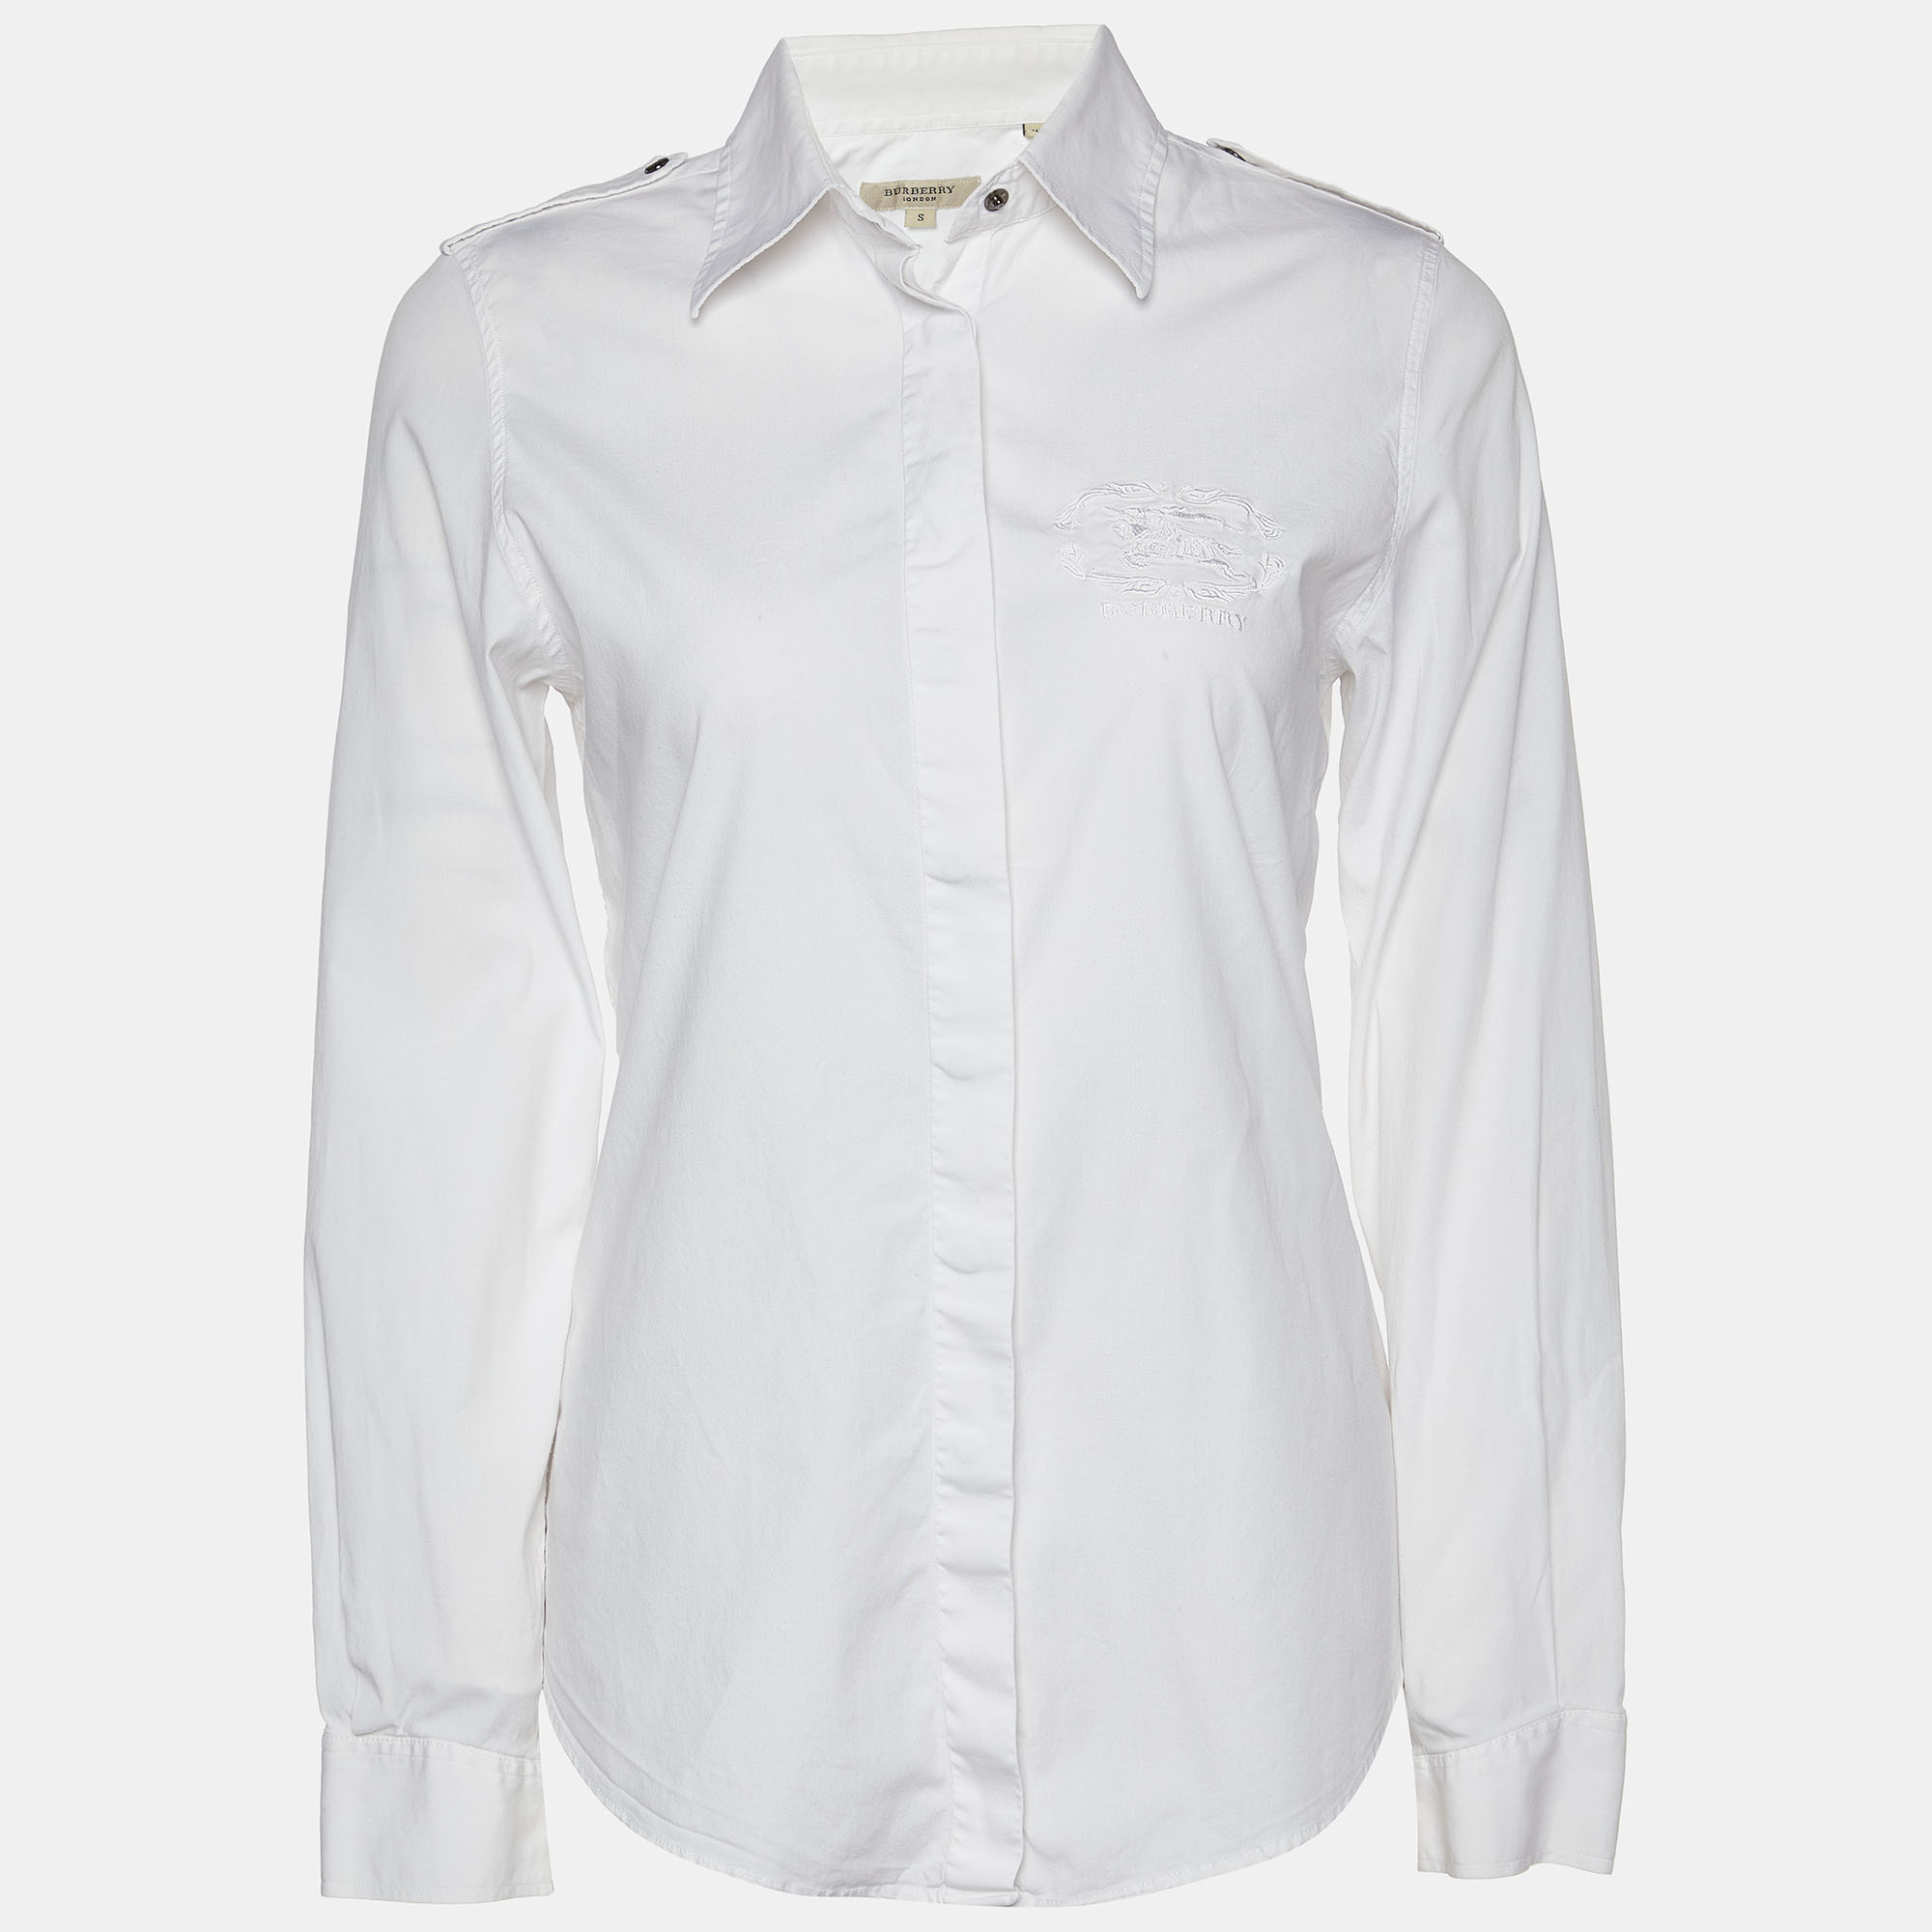 Burberry white cotton logo embroidered long sleeve shirt s